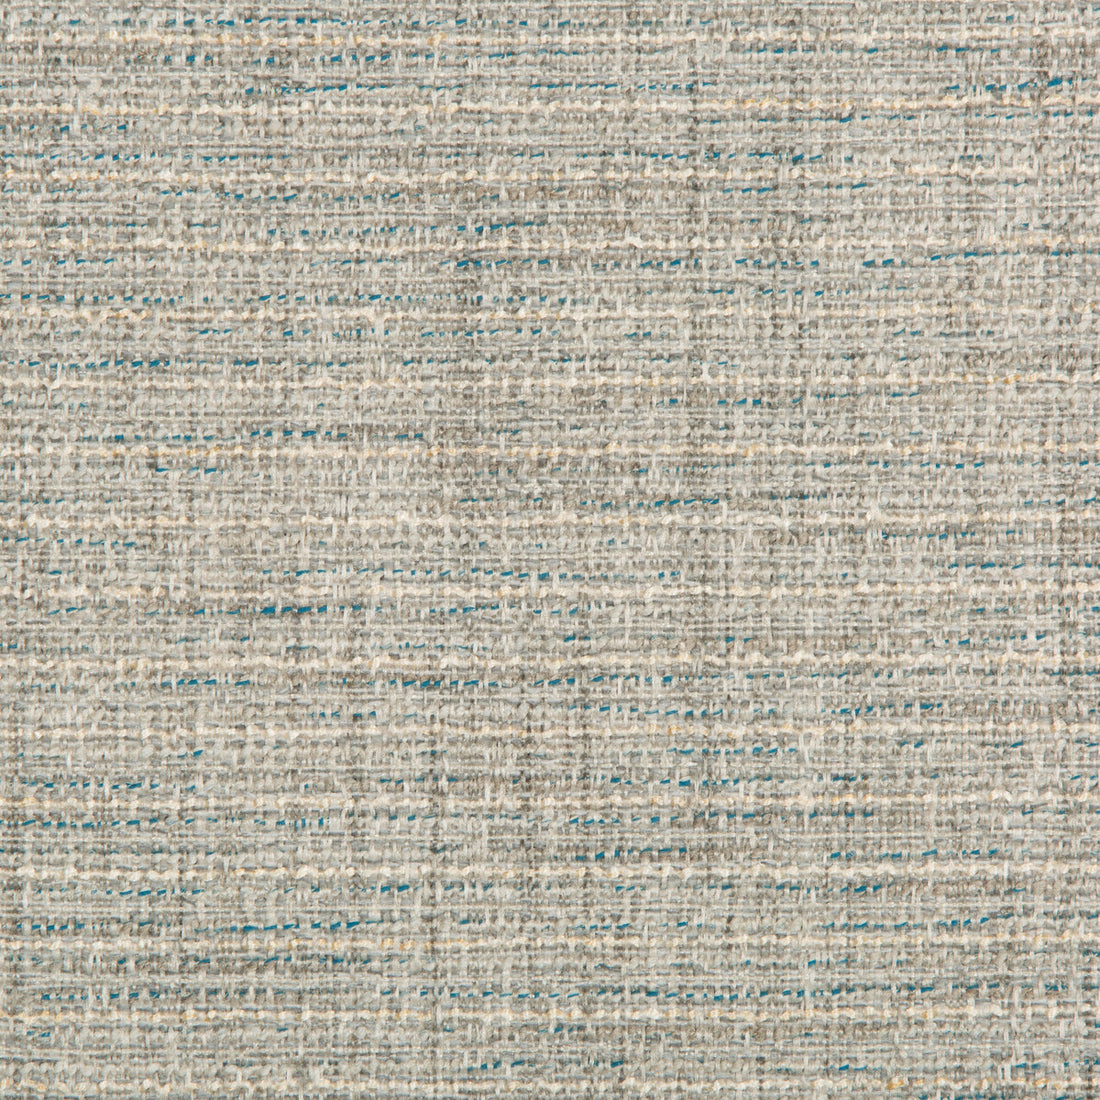 Kravet Contract fabric in 35410-511 color - pattern 35410.511.0 - by Kravet Contract in the Crypton Incase collection